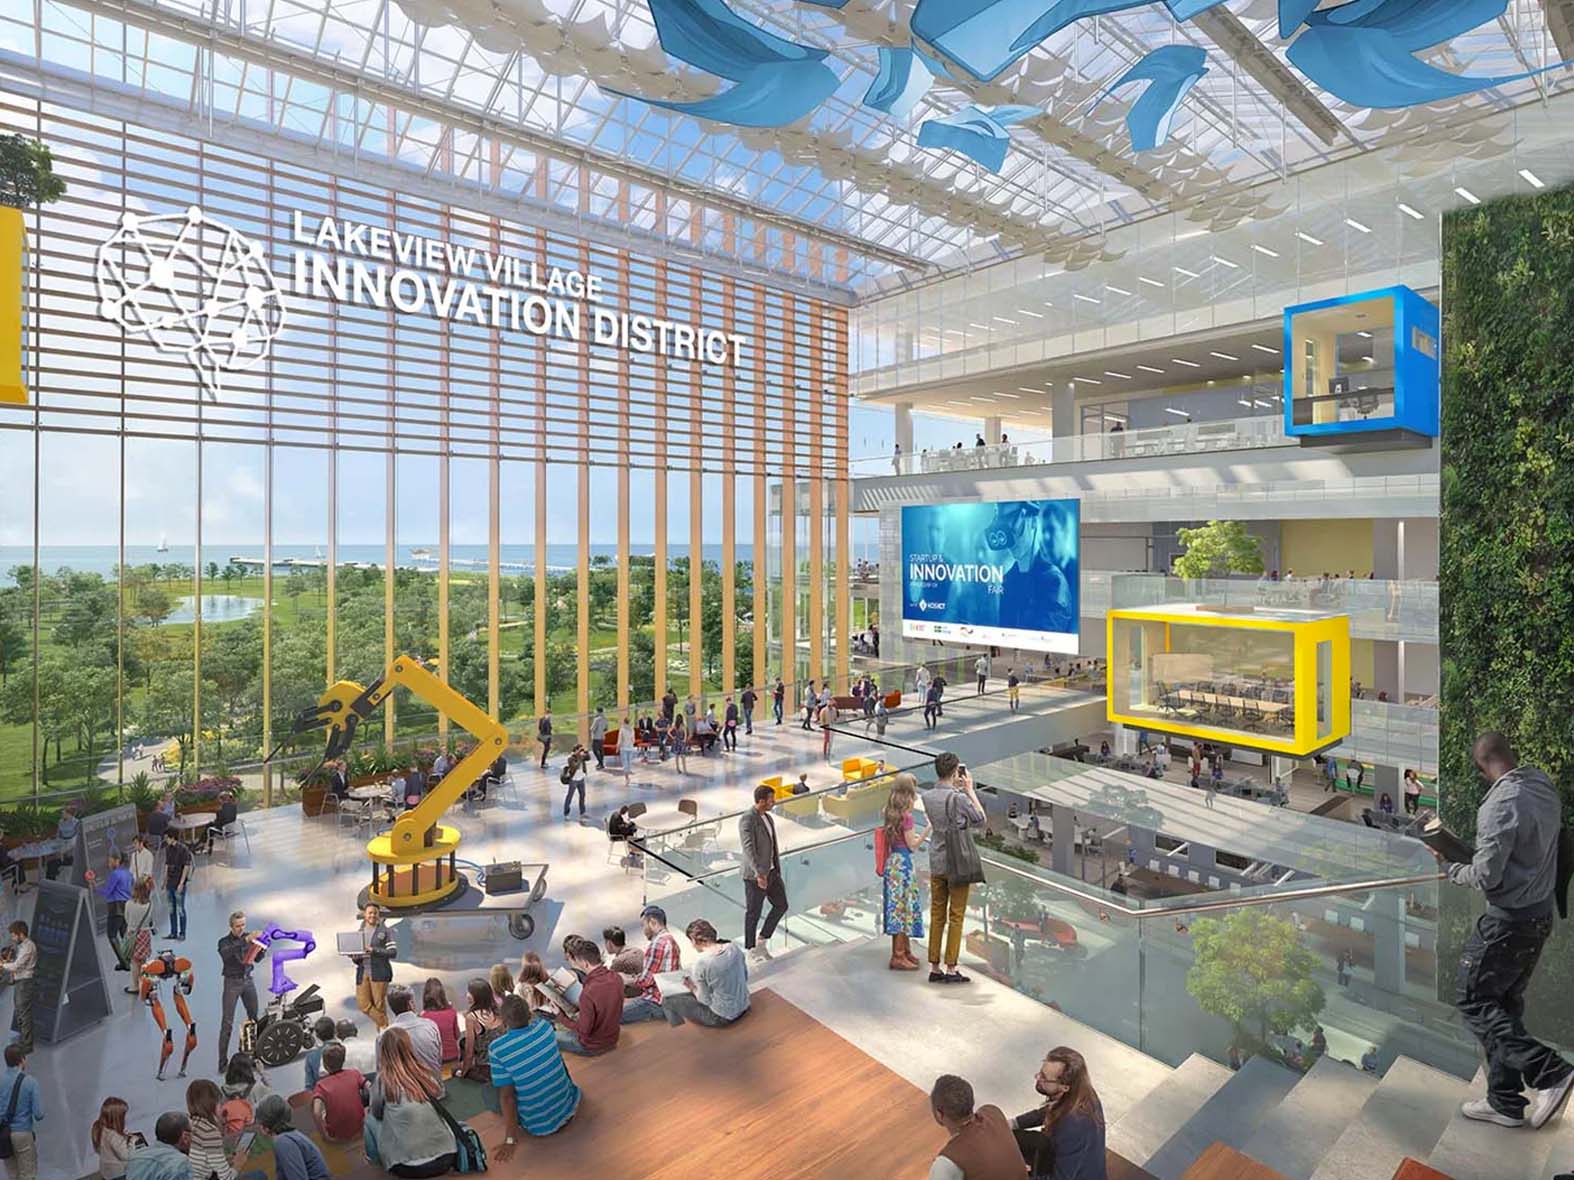 a rendering of the innovation district interior at lakeview village